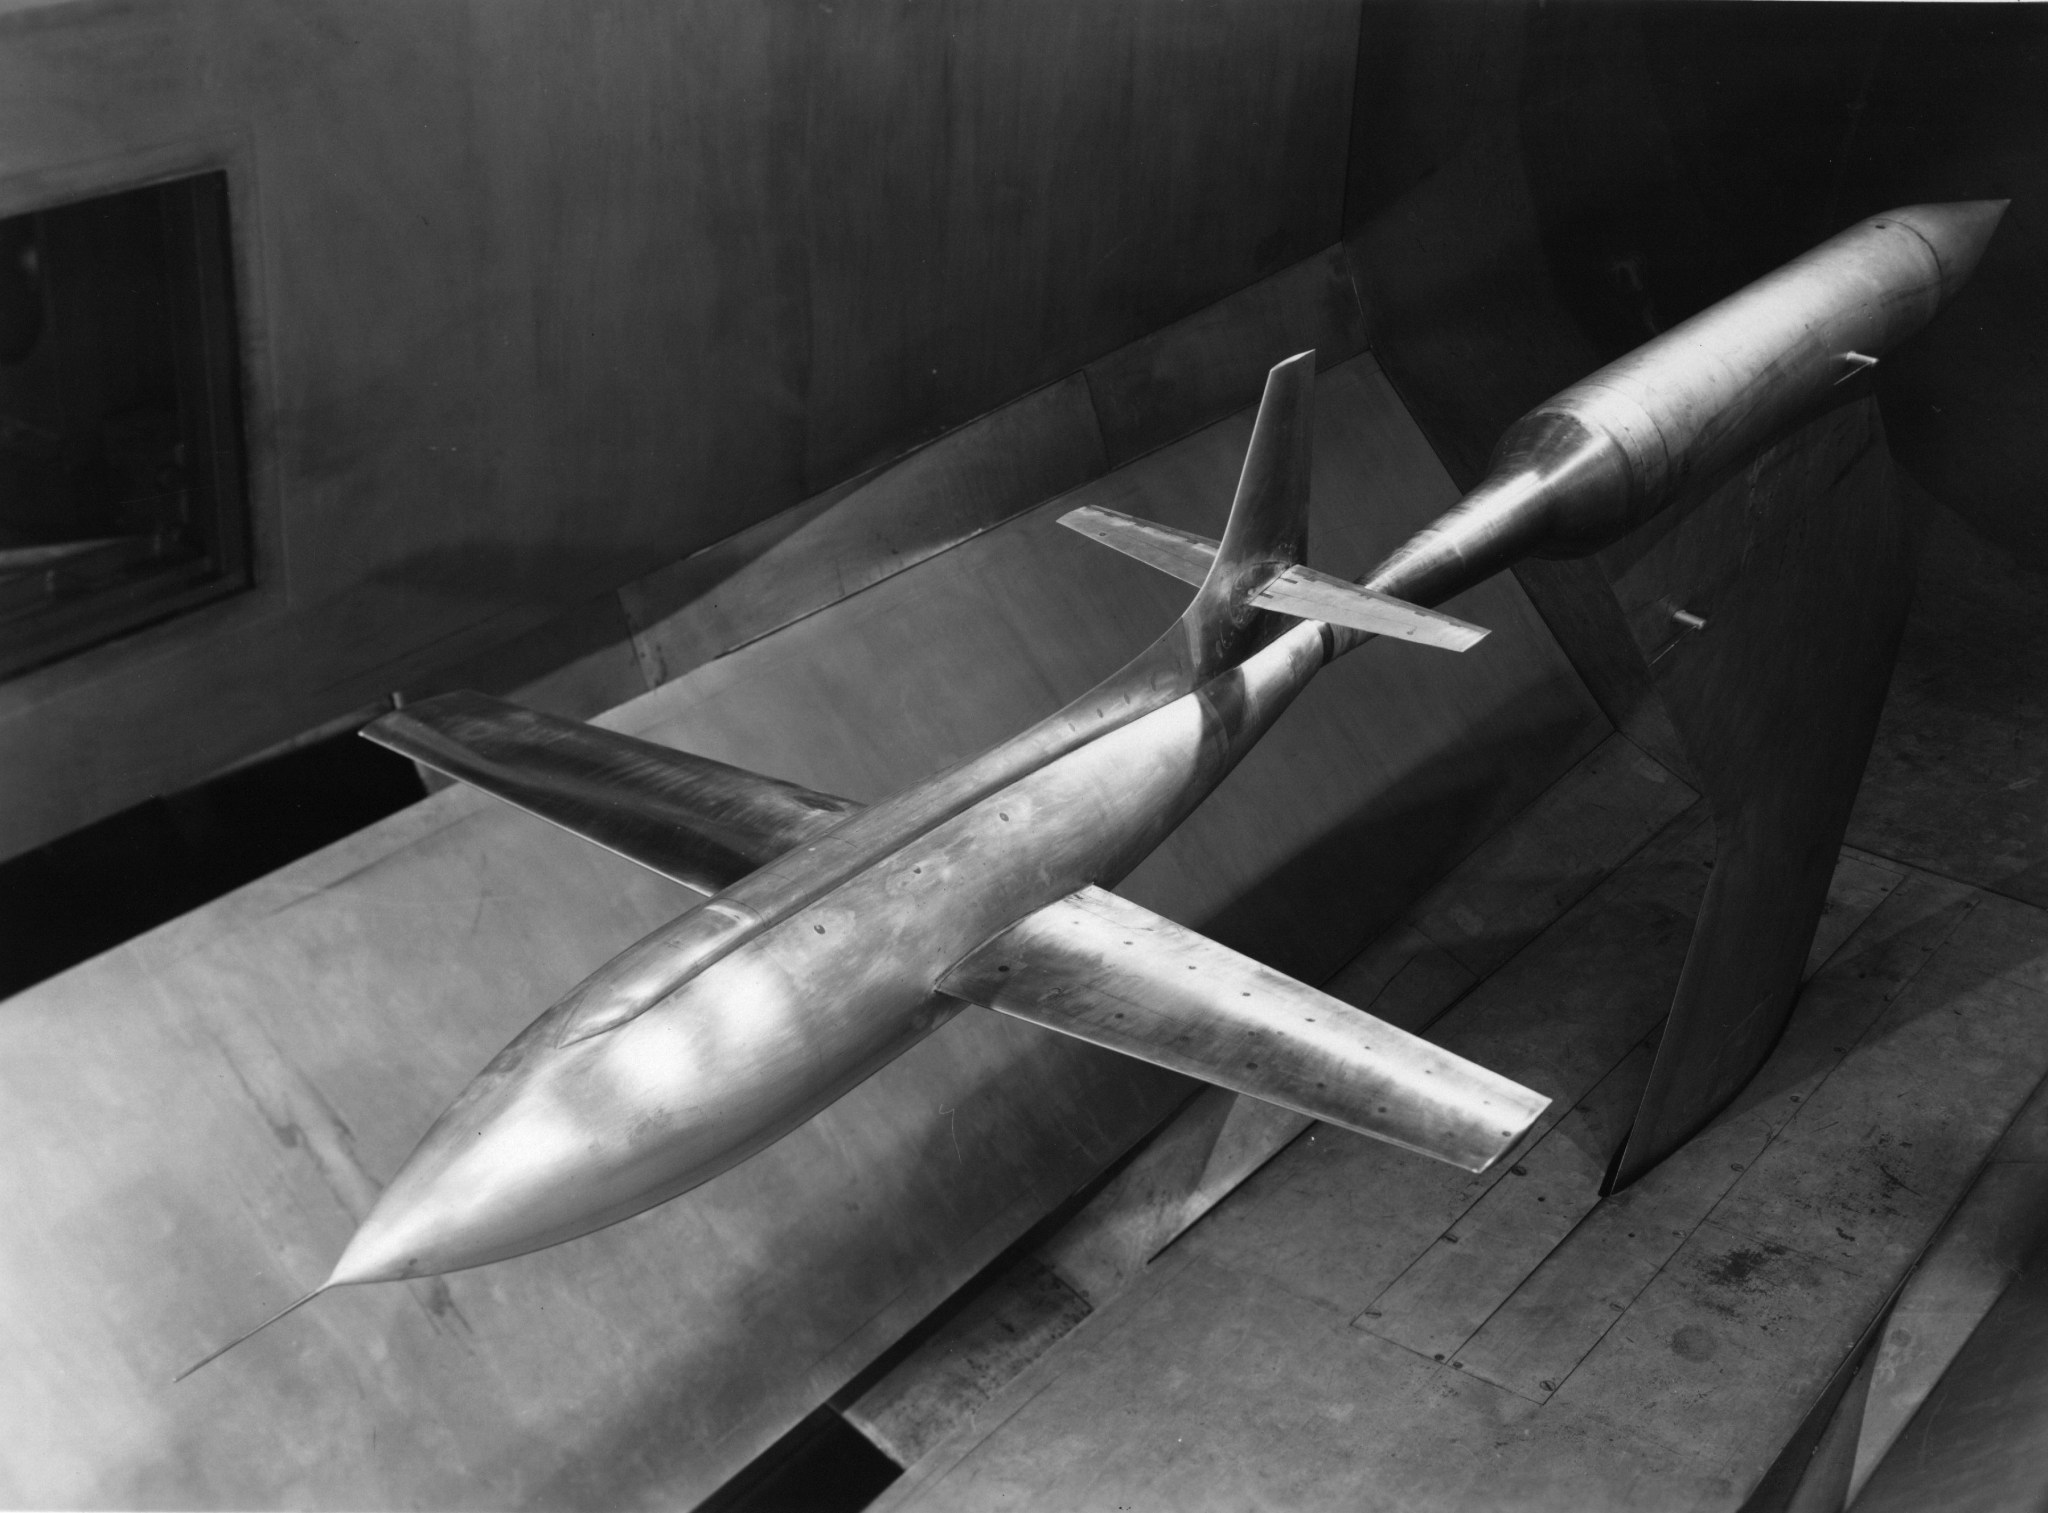 This sting-mounted aerodynamic model of the X-1 shows it being tested in the tunnel’s test section in 1951, about five years after the historic sound-breaking flight. 